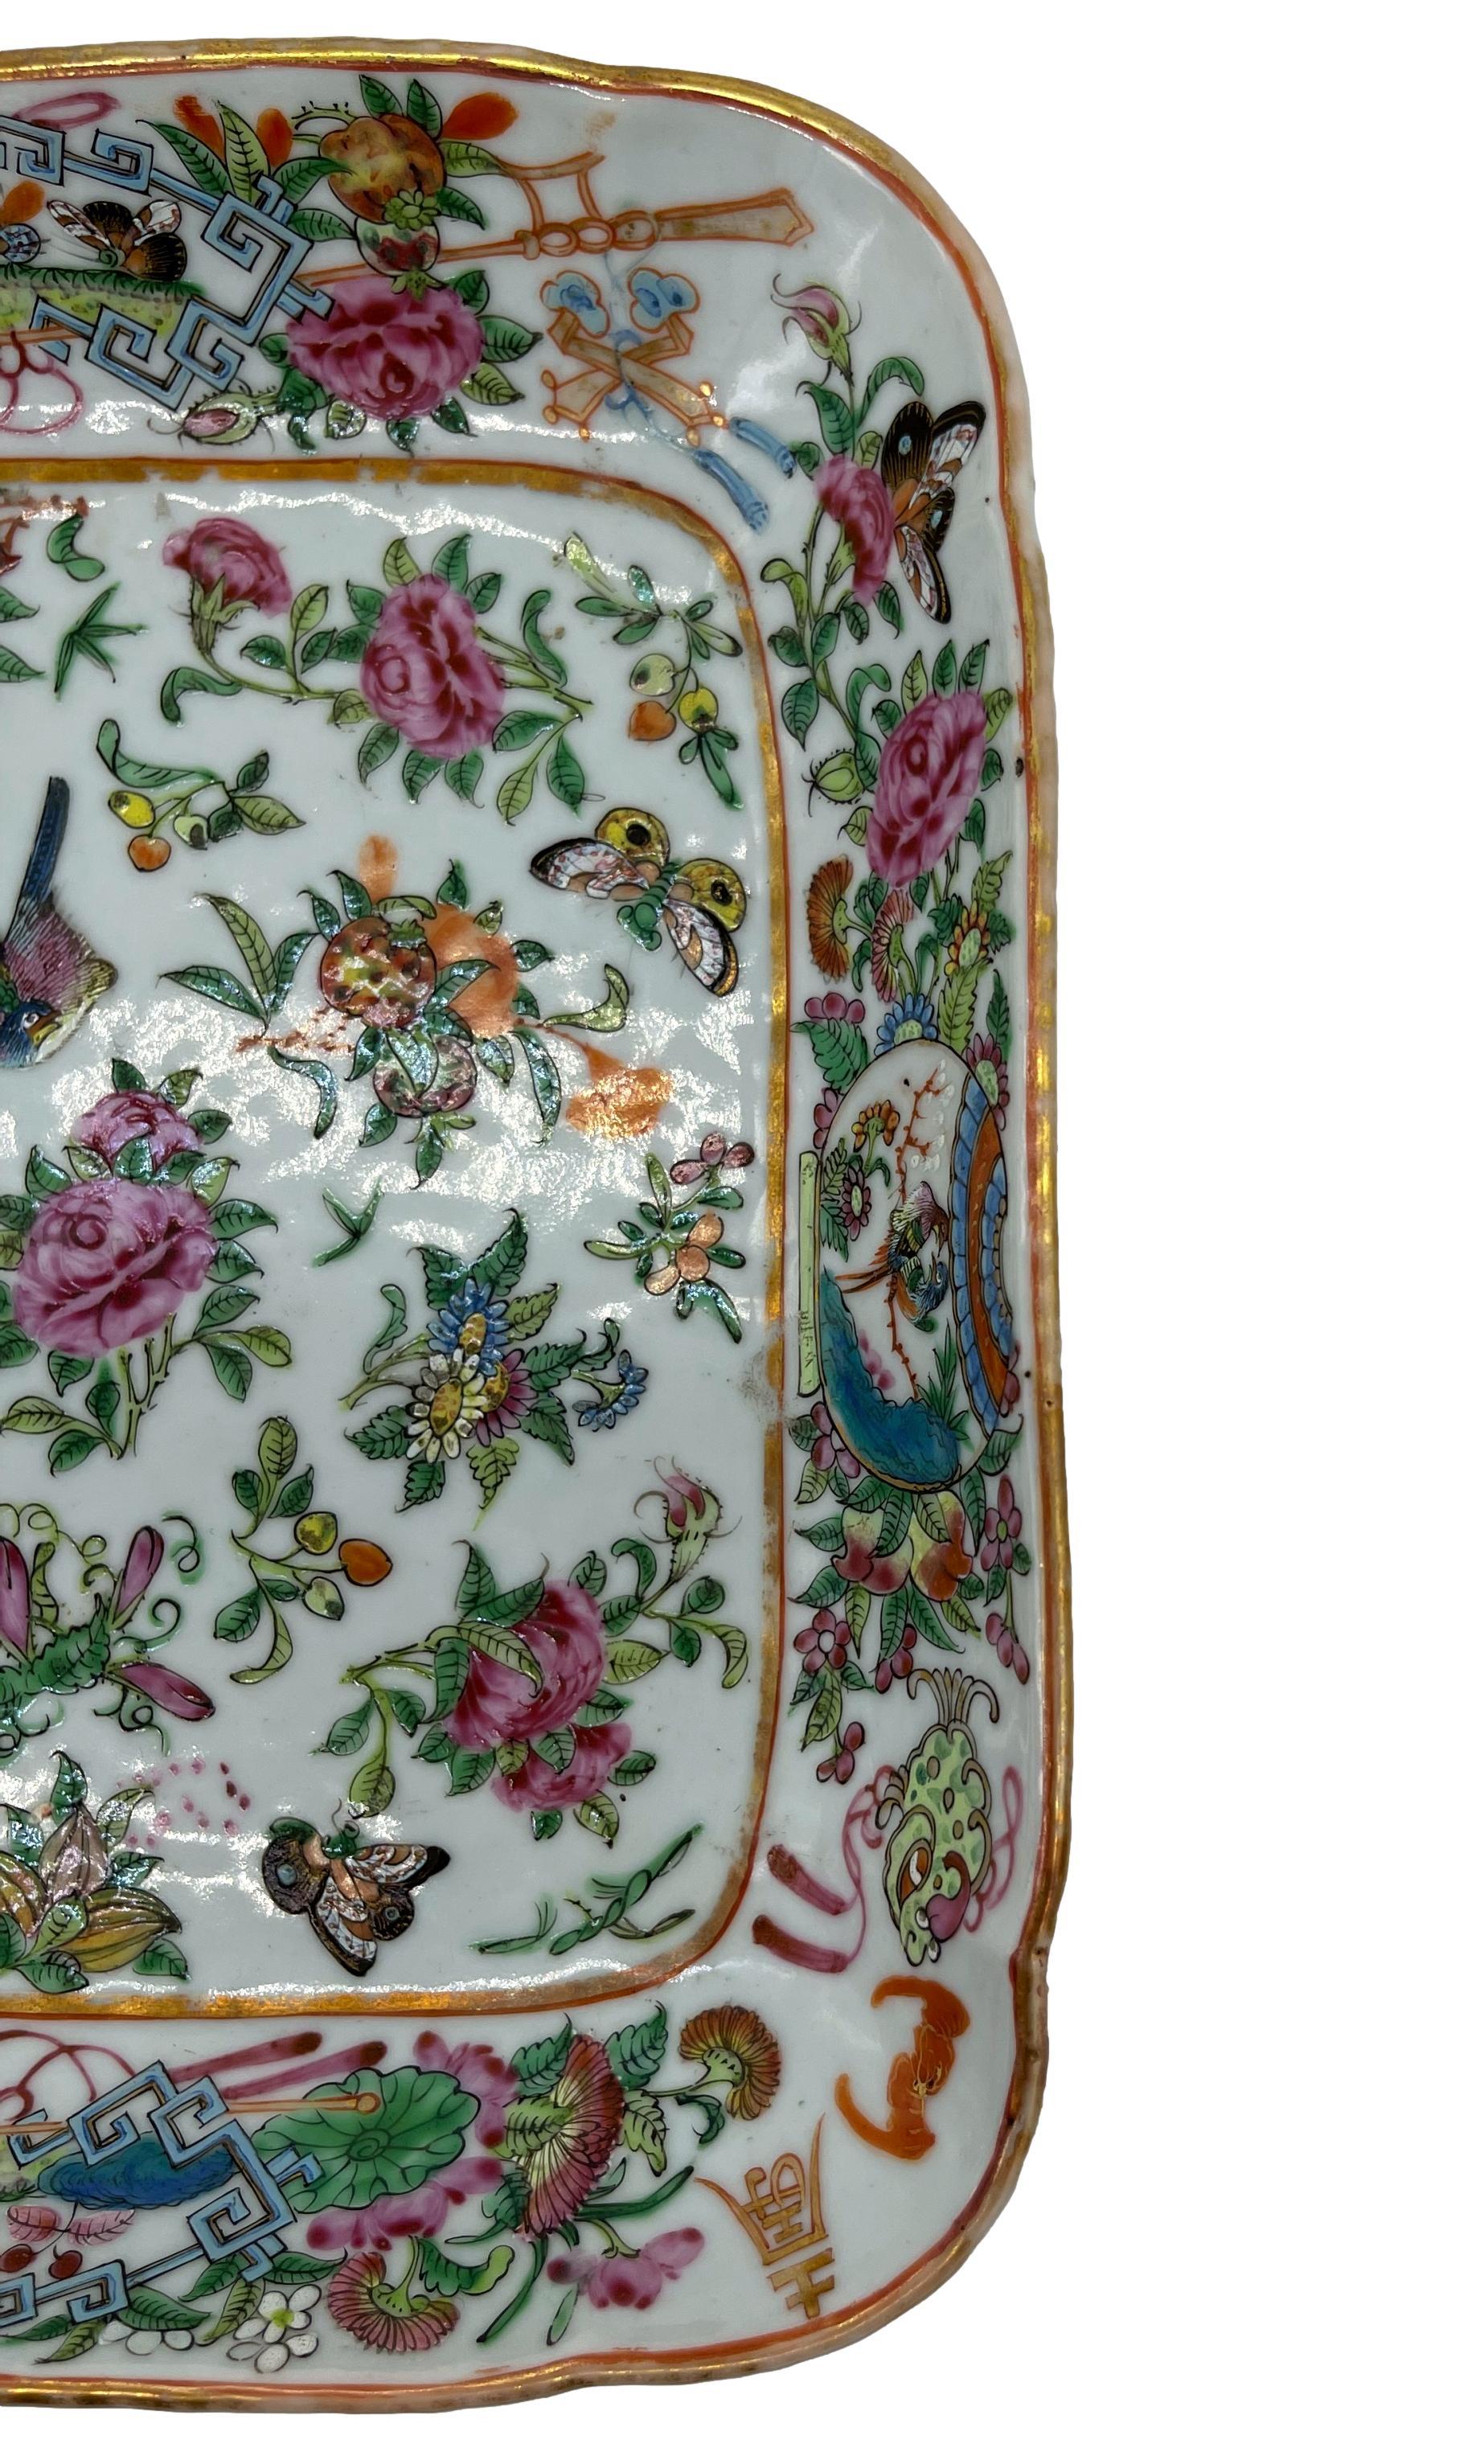 Chinese Export Famille Rose Square Dish, Canton, ca. 1840